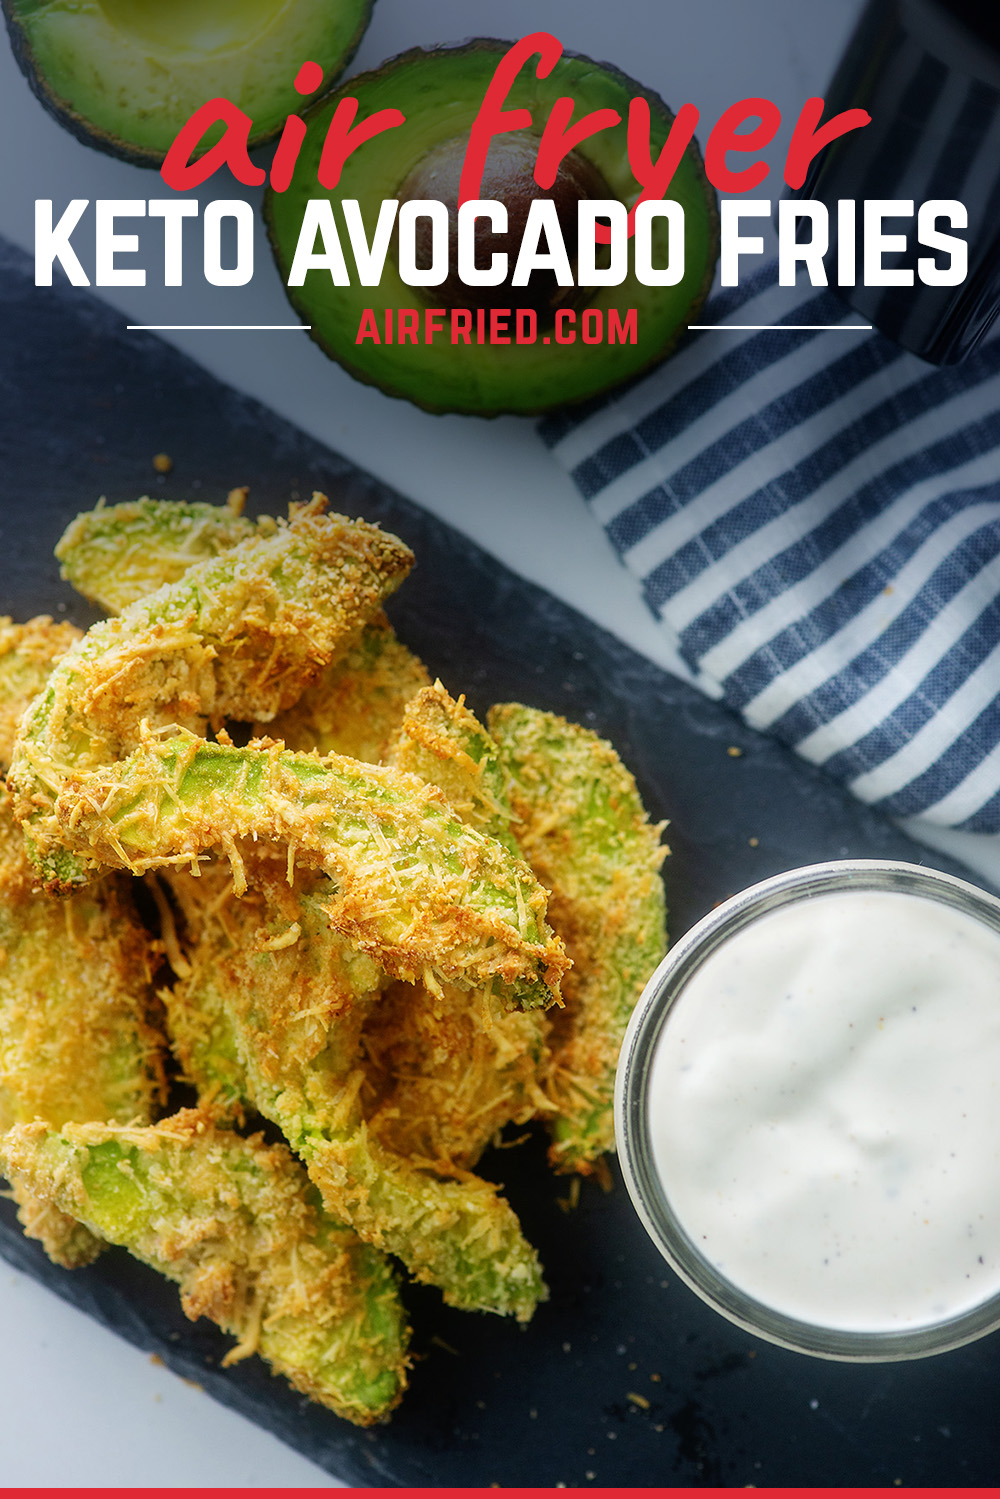 Overhead view of avocado fries next to a cup of ranch dressing.